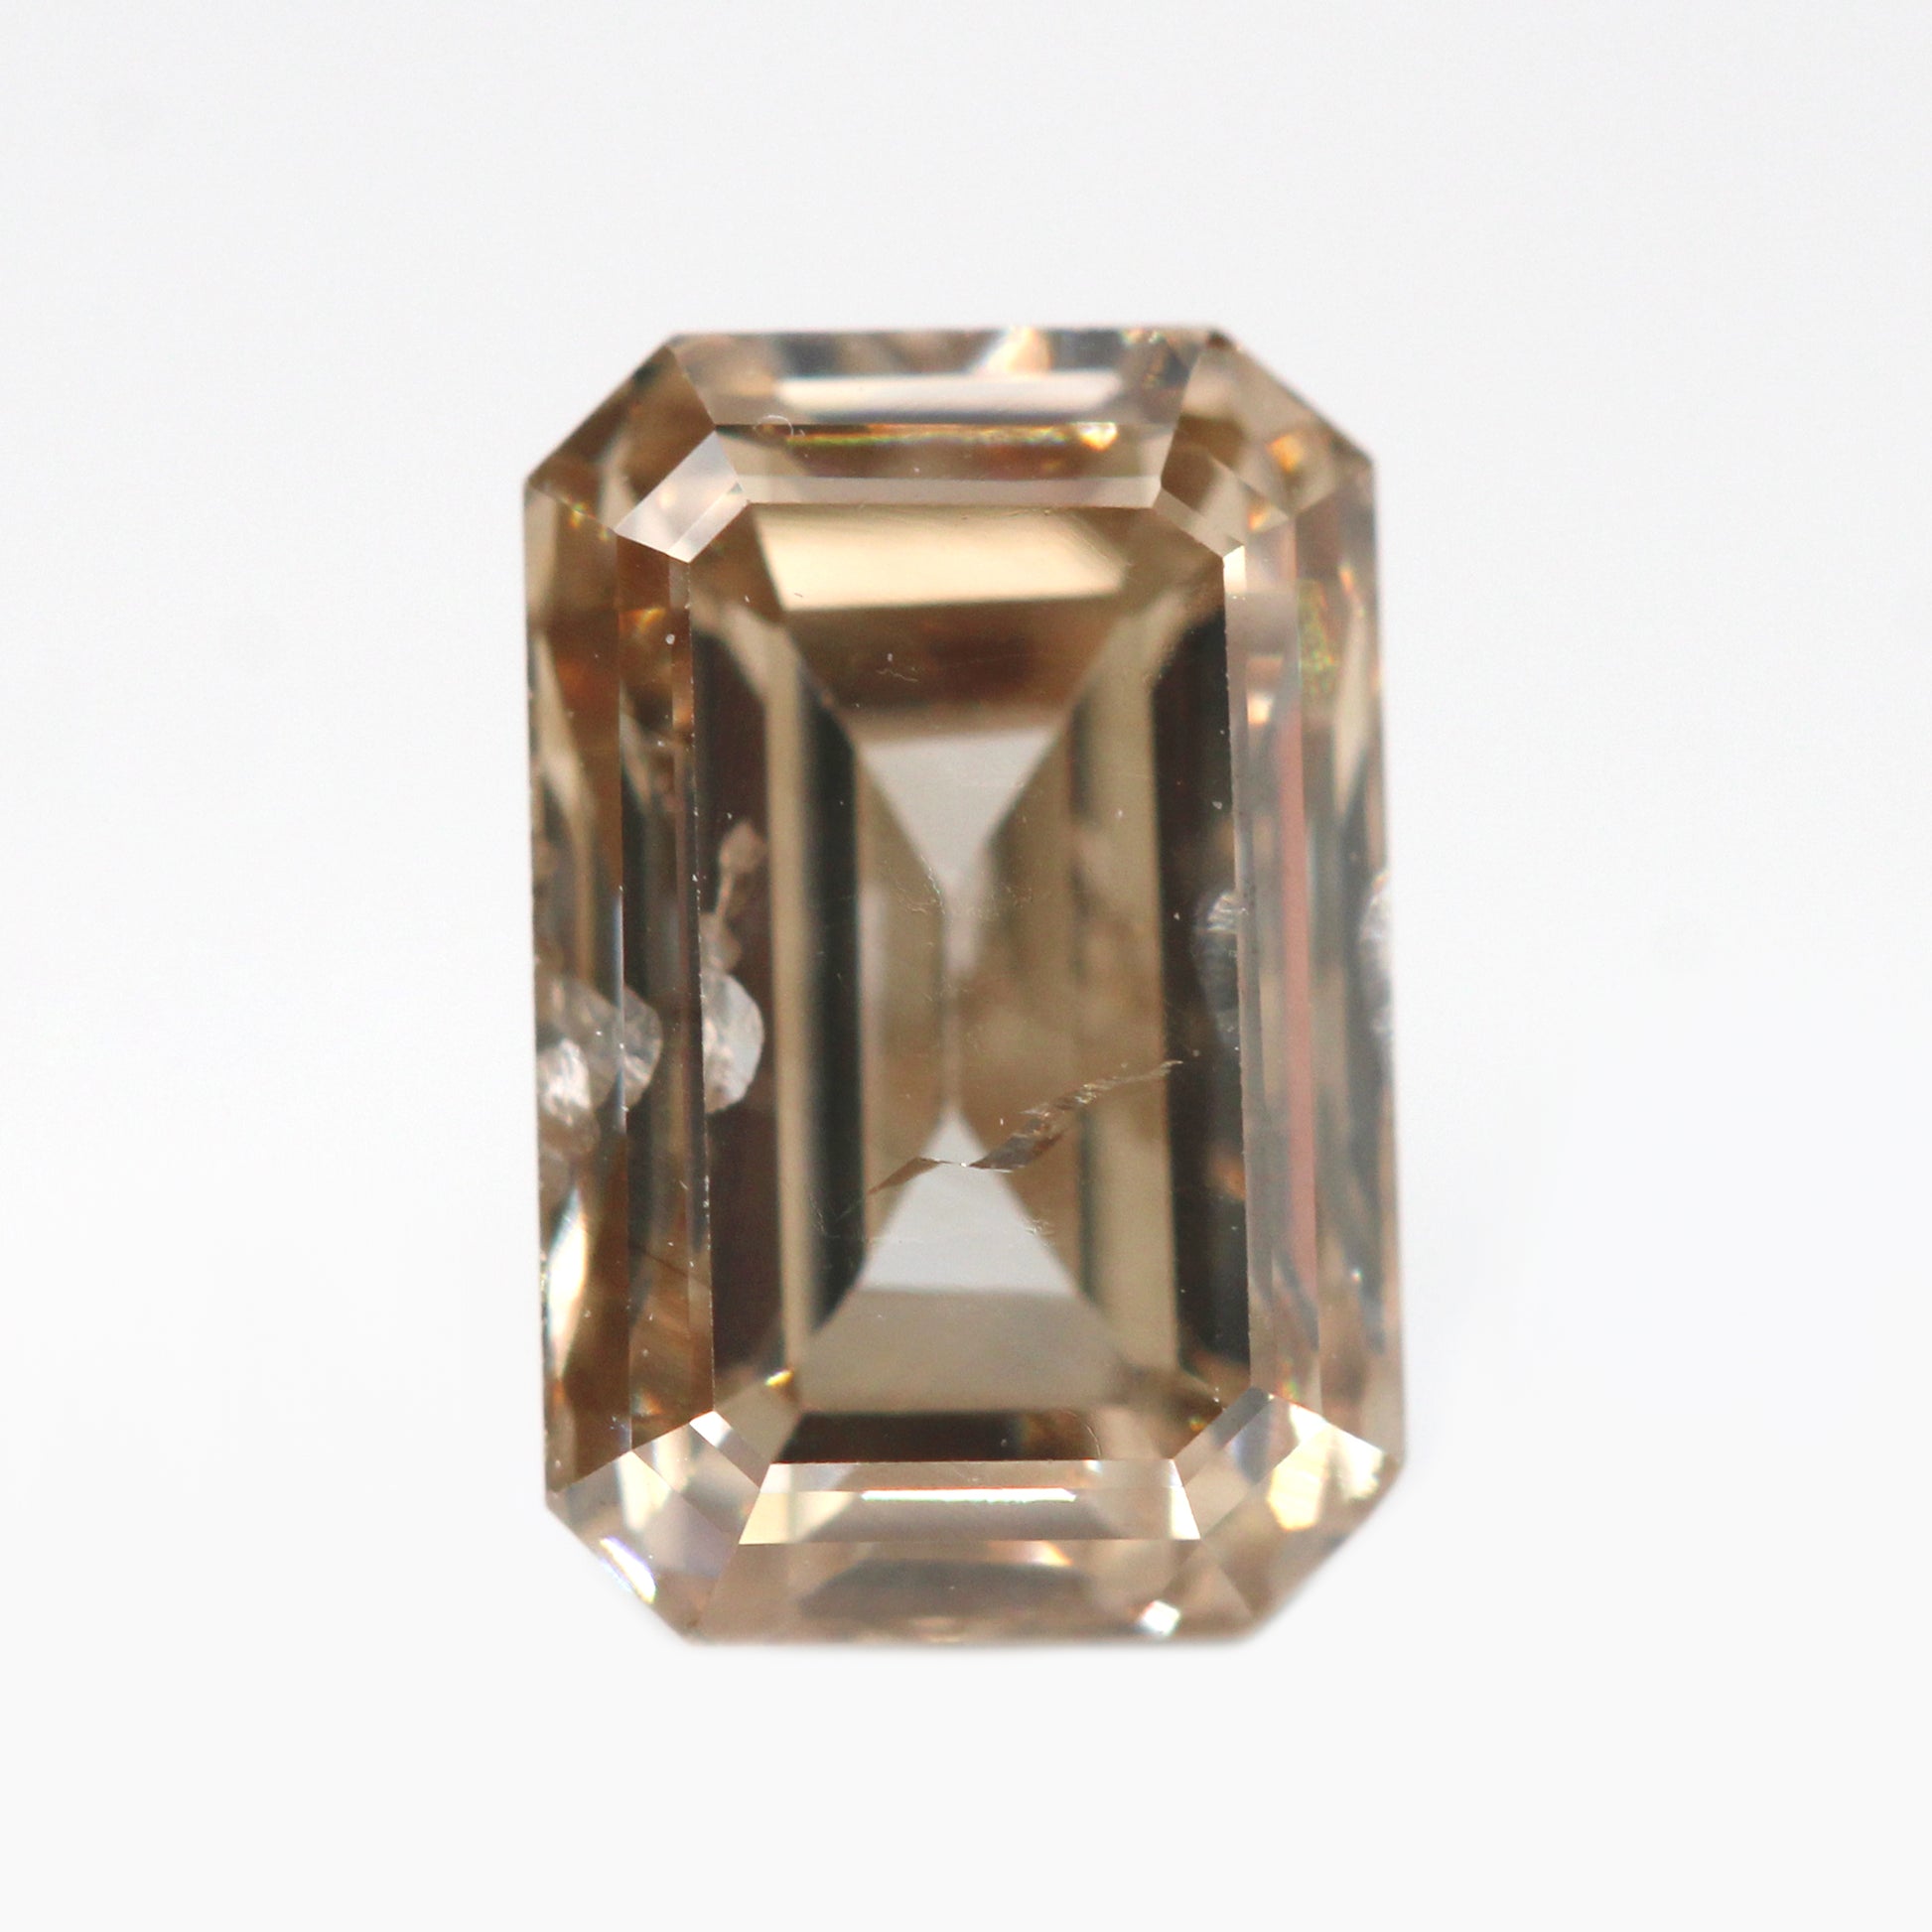 1.05 Carat Champagne Emerald Cut Celestial Diamond for Custom Work - Inventory Code SCE105 - Midwinter Co. Alternative Bridal Rings and Modern Fine Jewelry